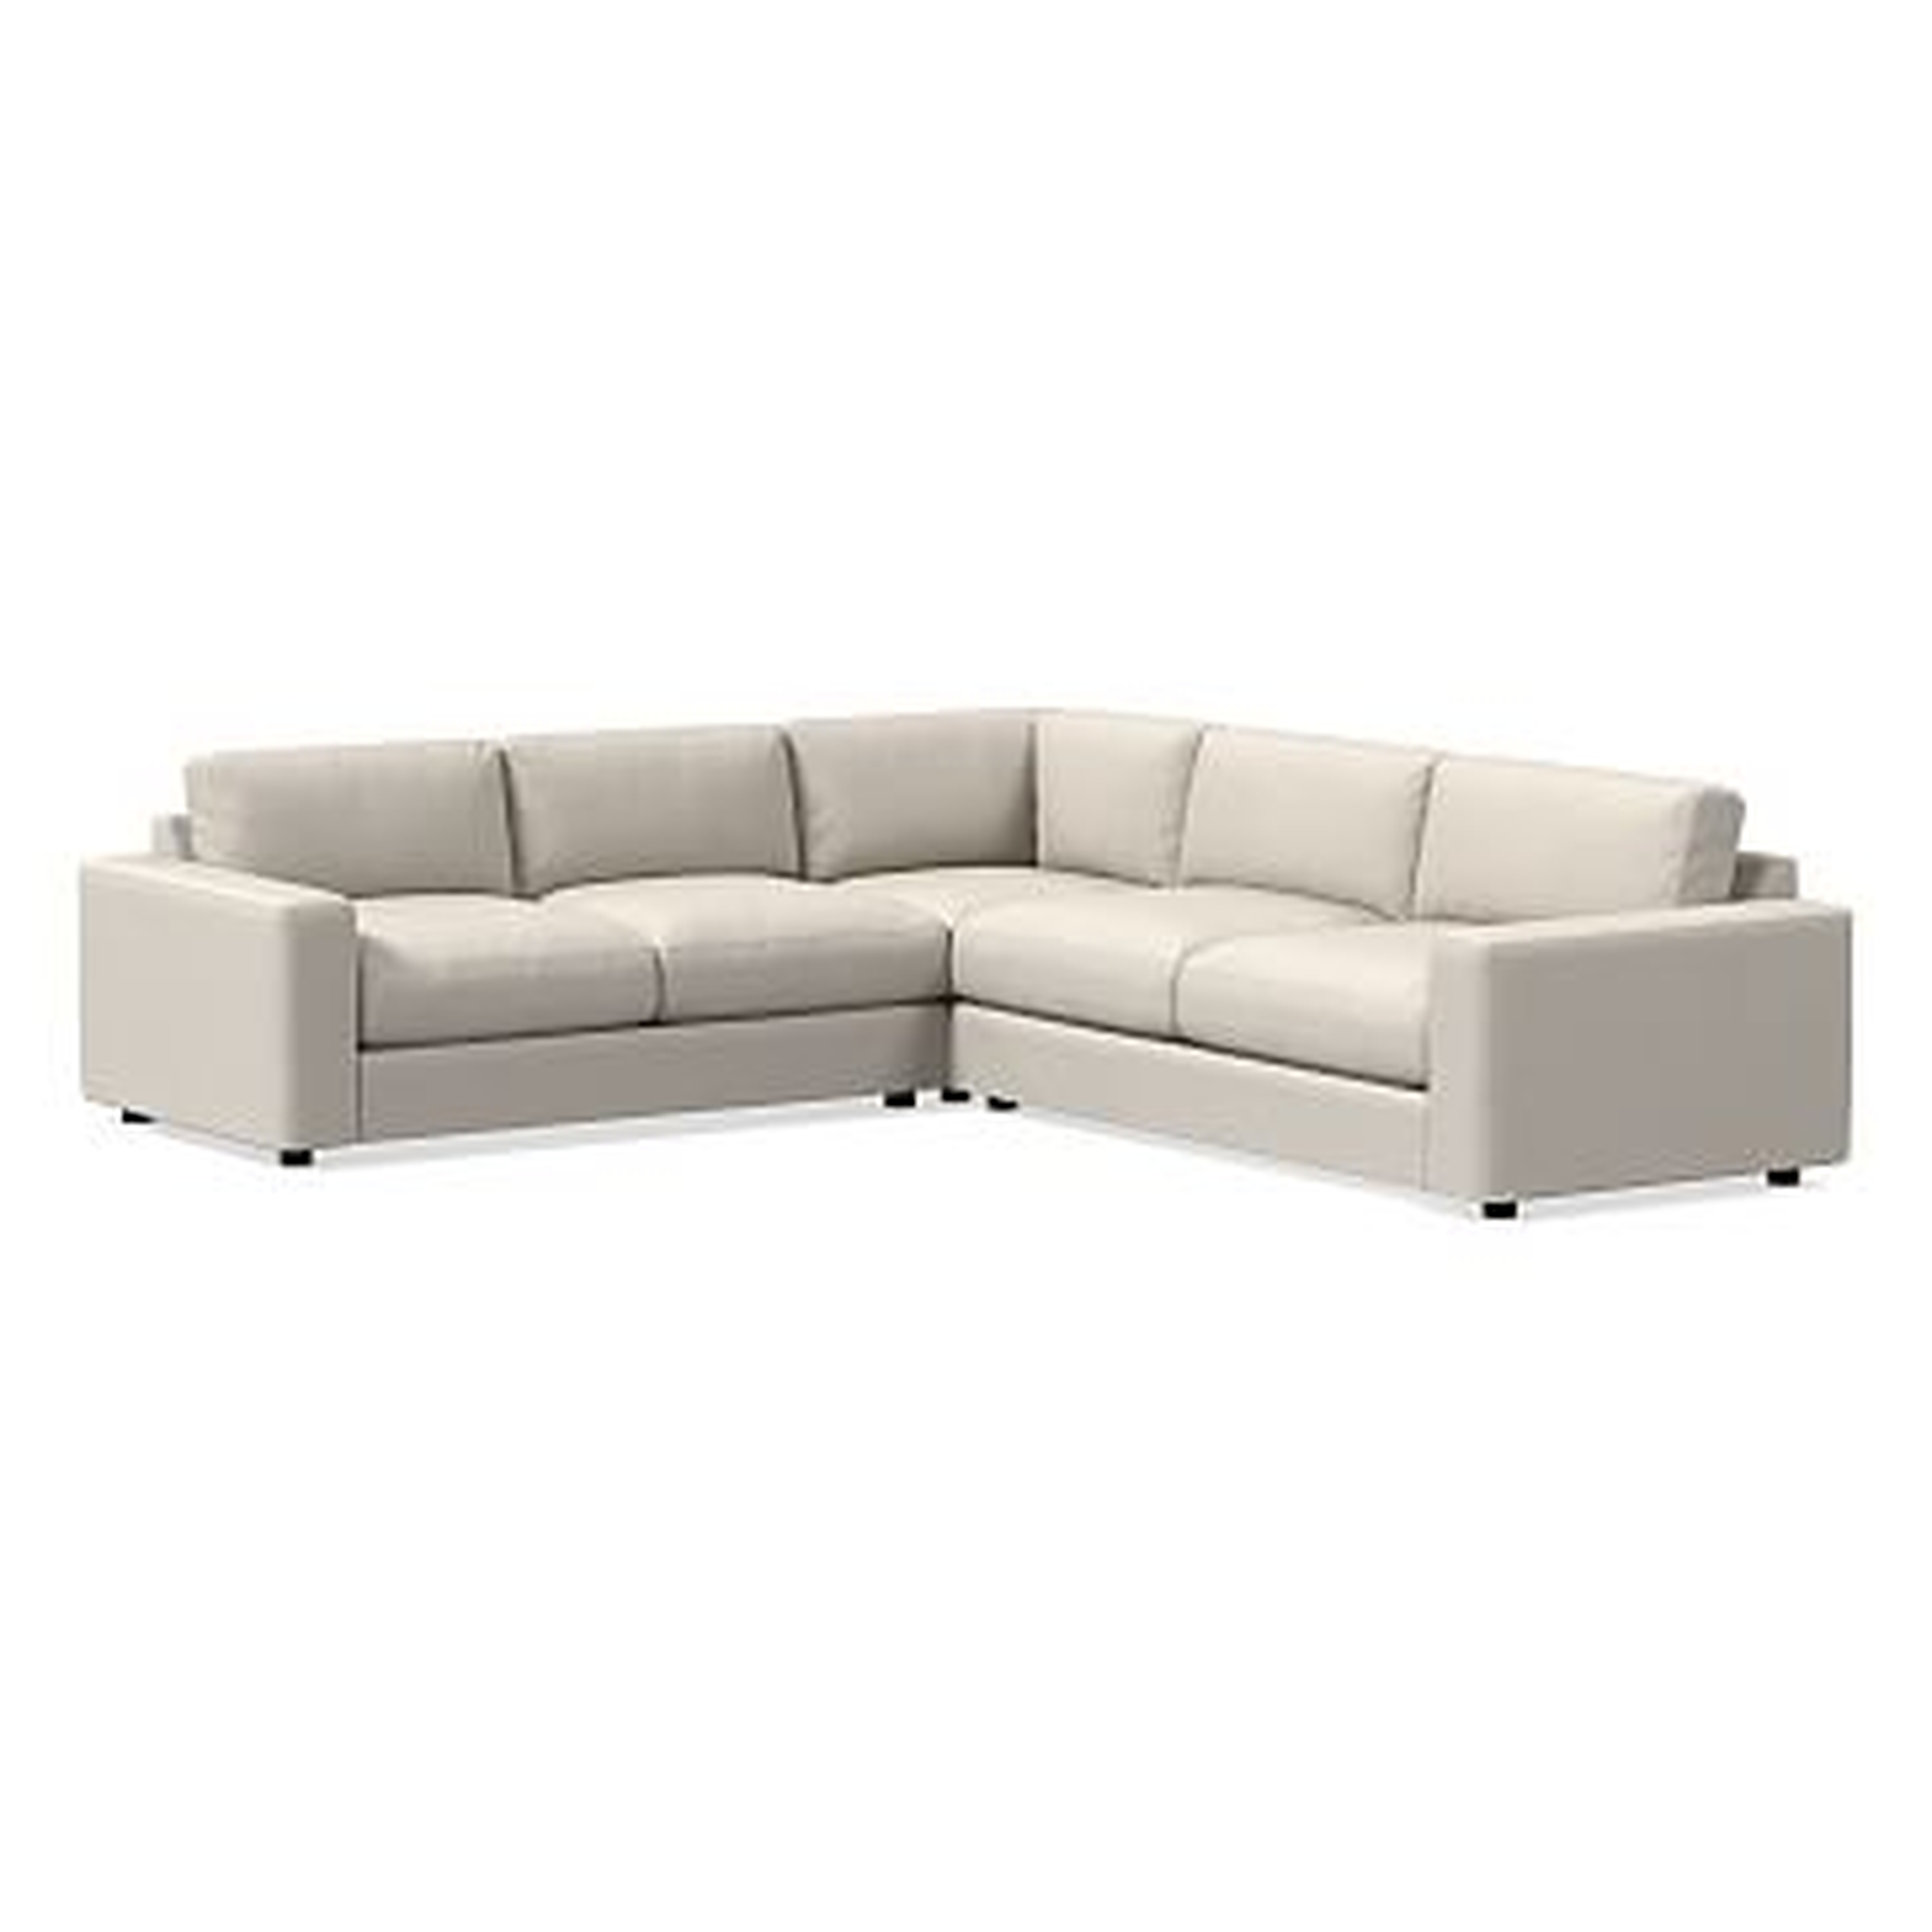 Urban Sectional Set 08: Left Arm 2 Seater Sofa, Corner, Right Arm 3 Seater Sofa, Down Blend, Performance Yarn Dyed Linen Weave, Alabaster, Concealed Supports - West Elm